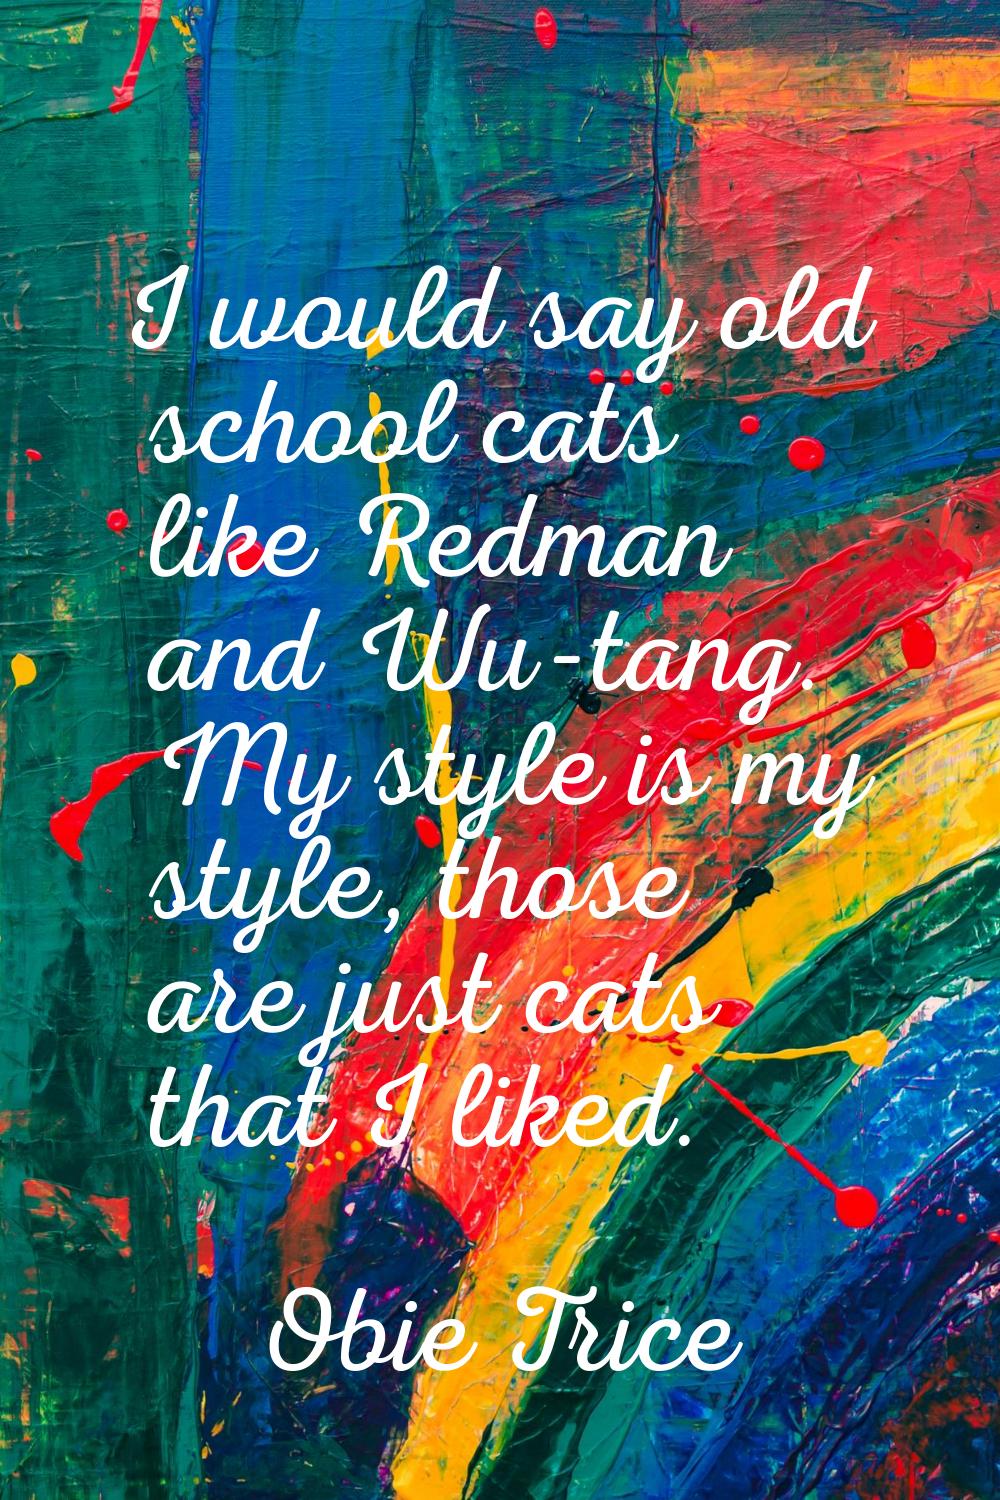 I would say old school cats like Redman and Wu-tang. My style is my style, those are just cats that